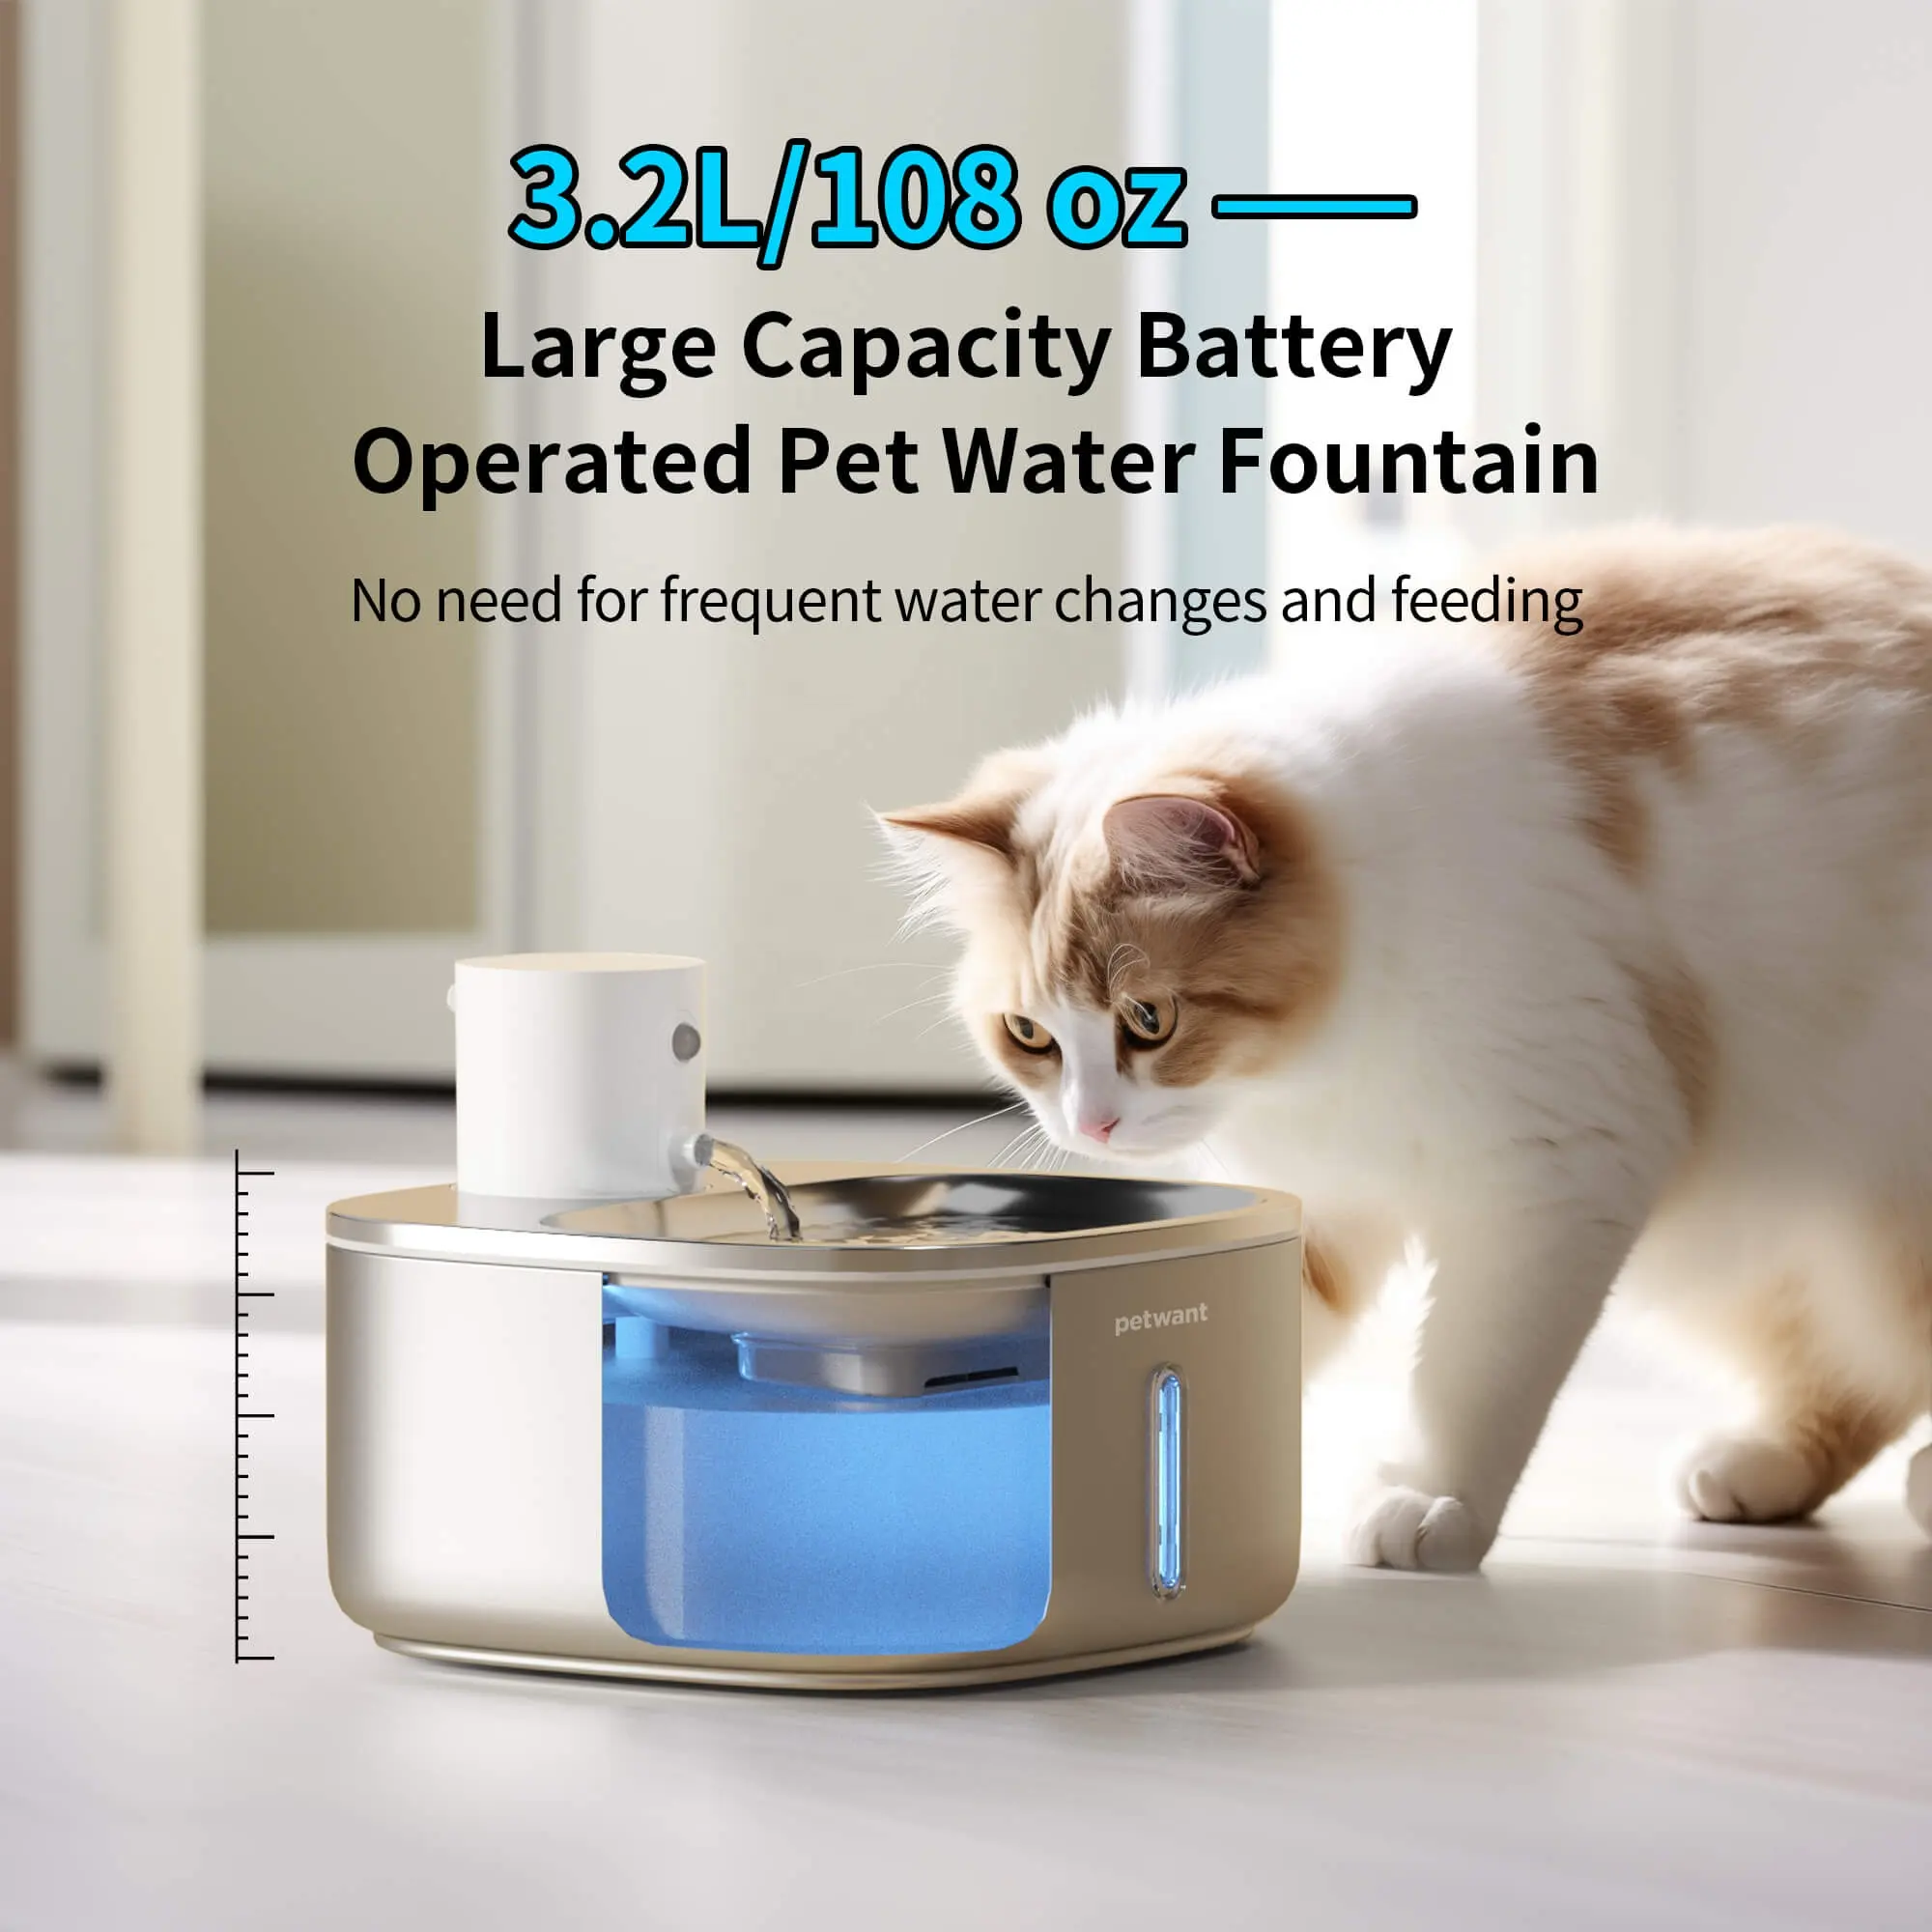 Petwant 3.2L Stainless Steel Wireless Battery Operated Pets Drinking Water Fountain For Small Animals Dogs Cats